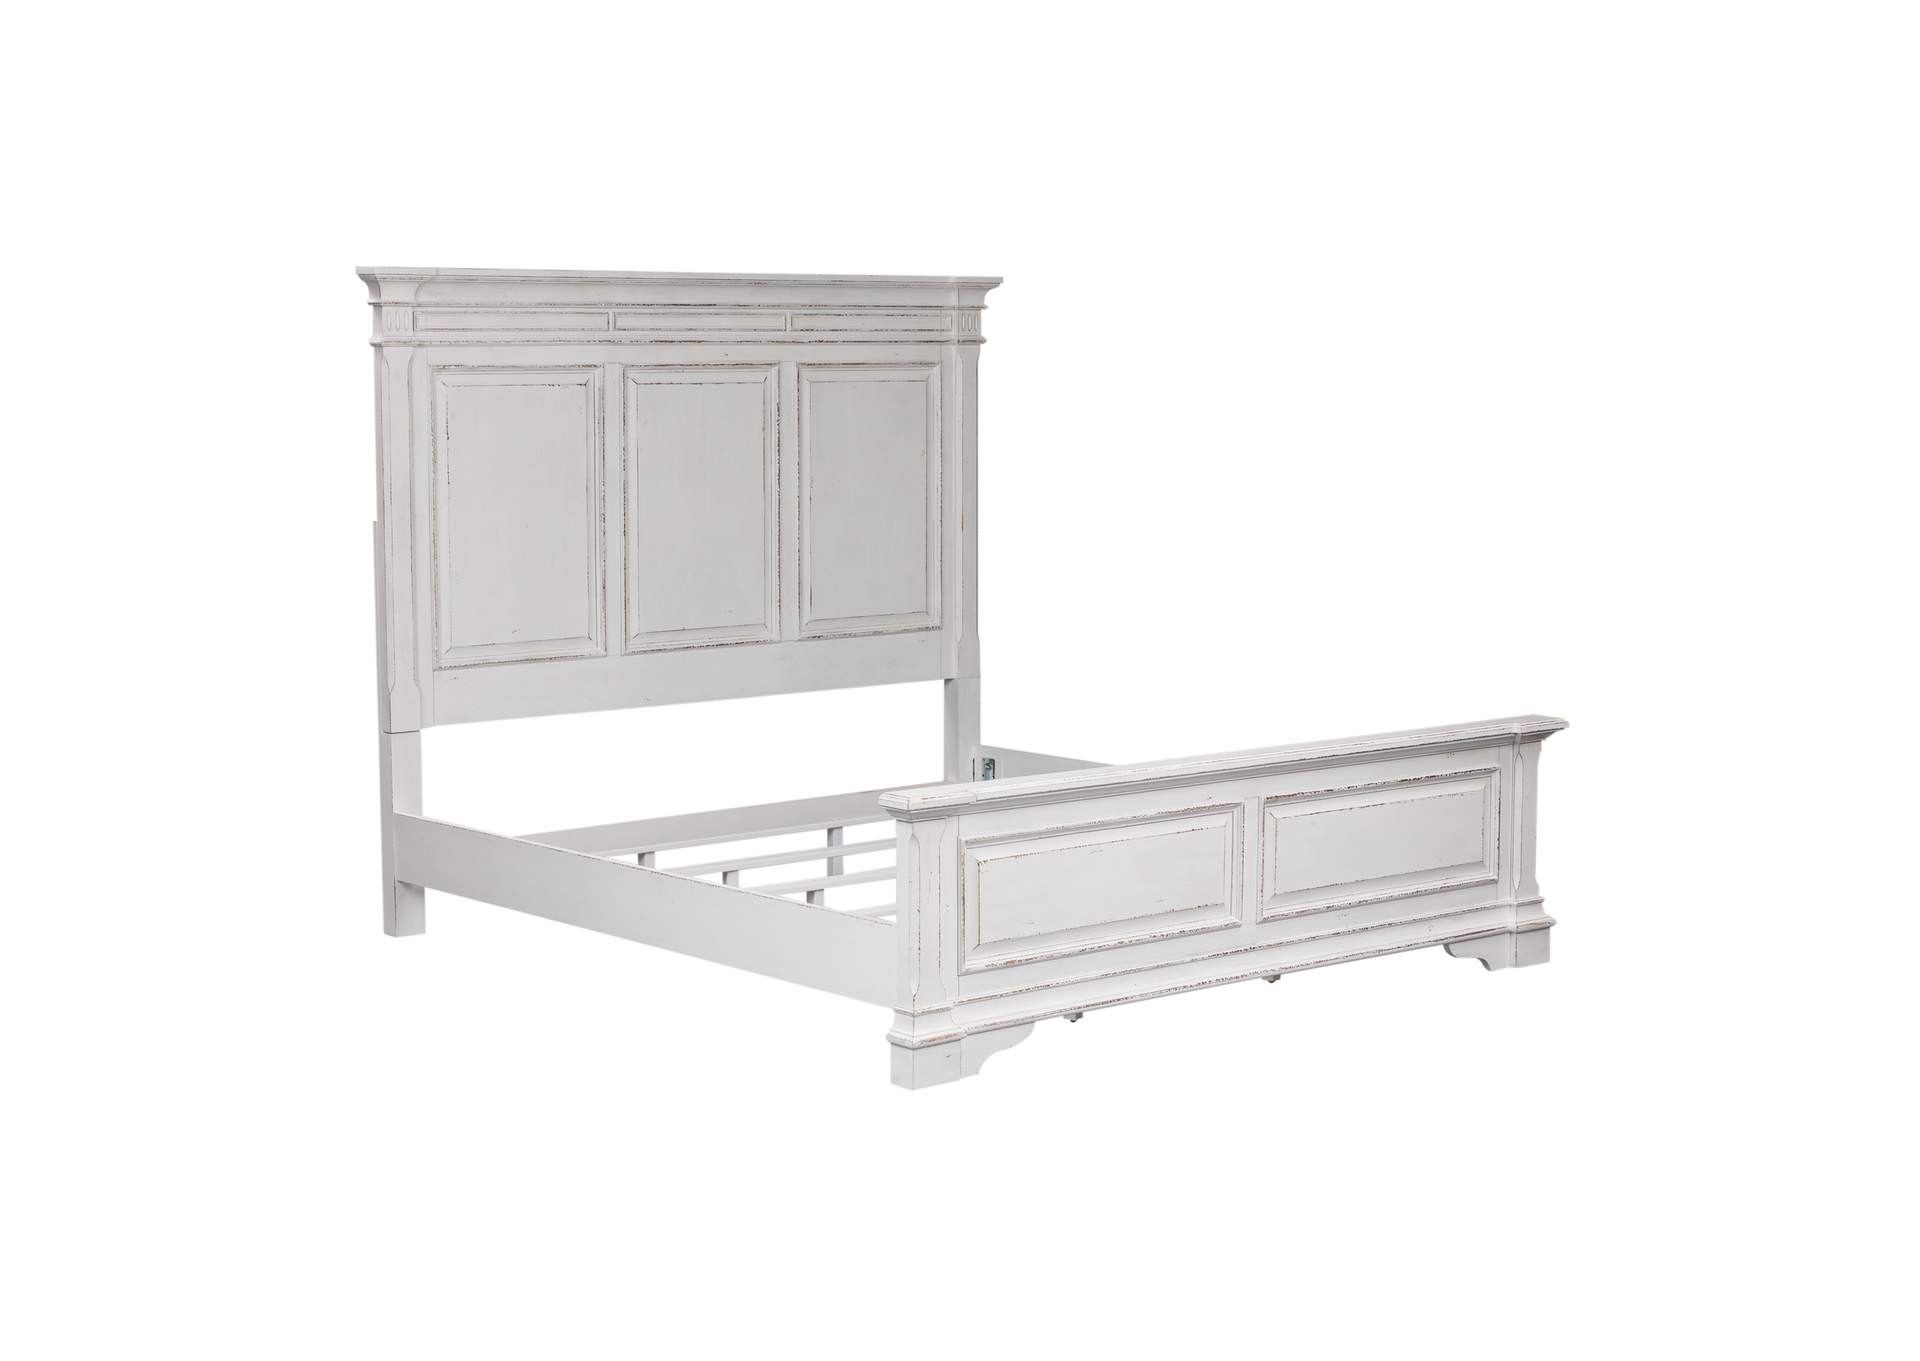 Abbey Park King Panel Bed,Liberty